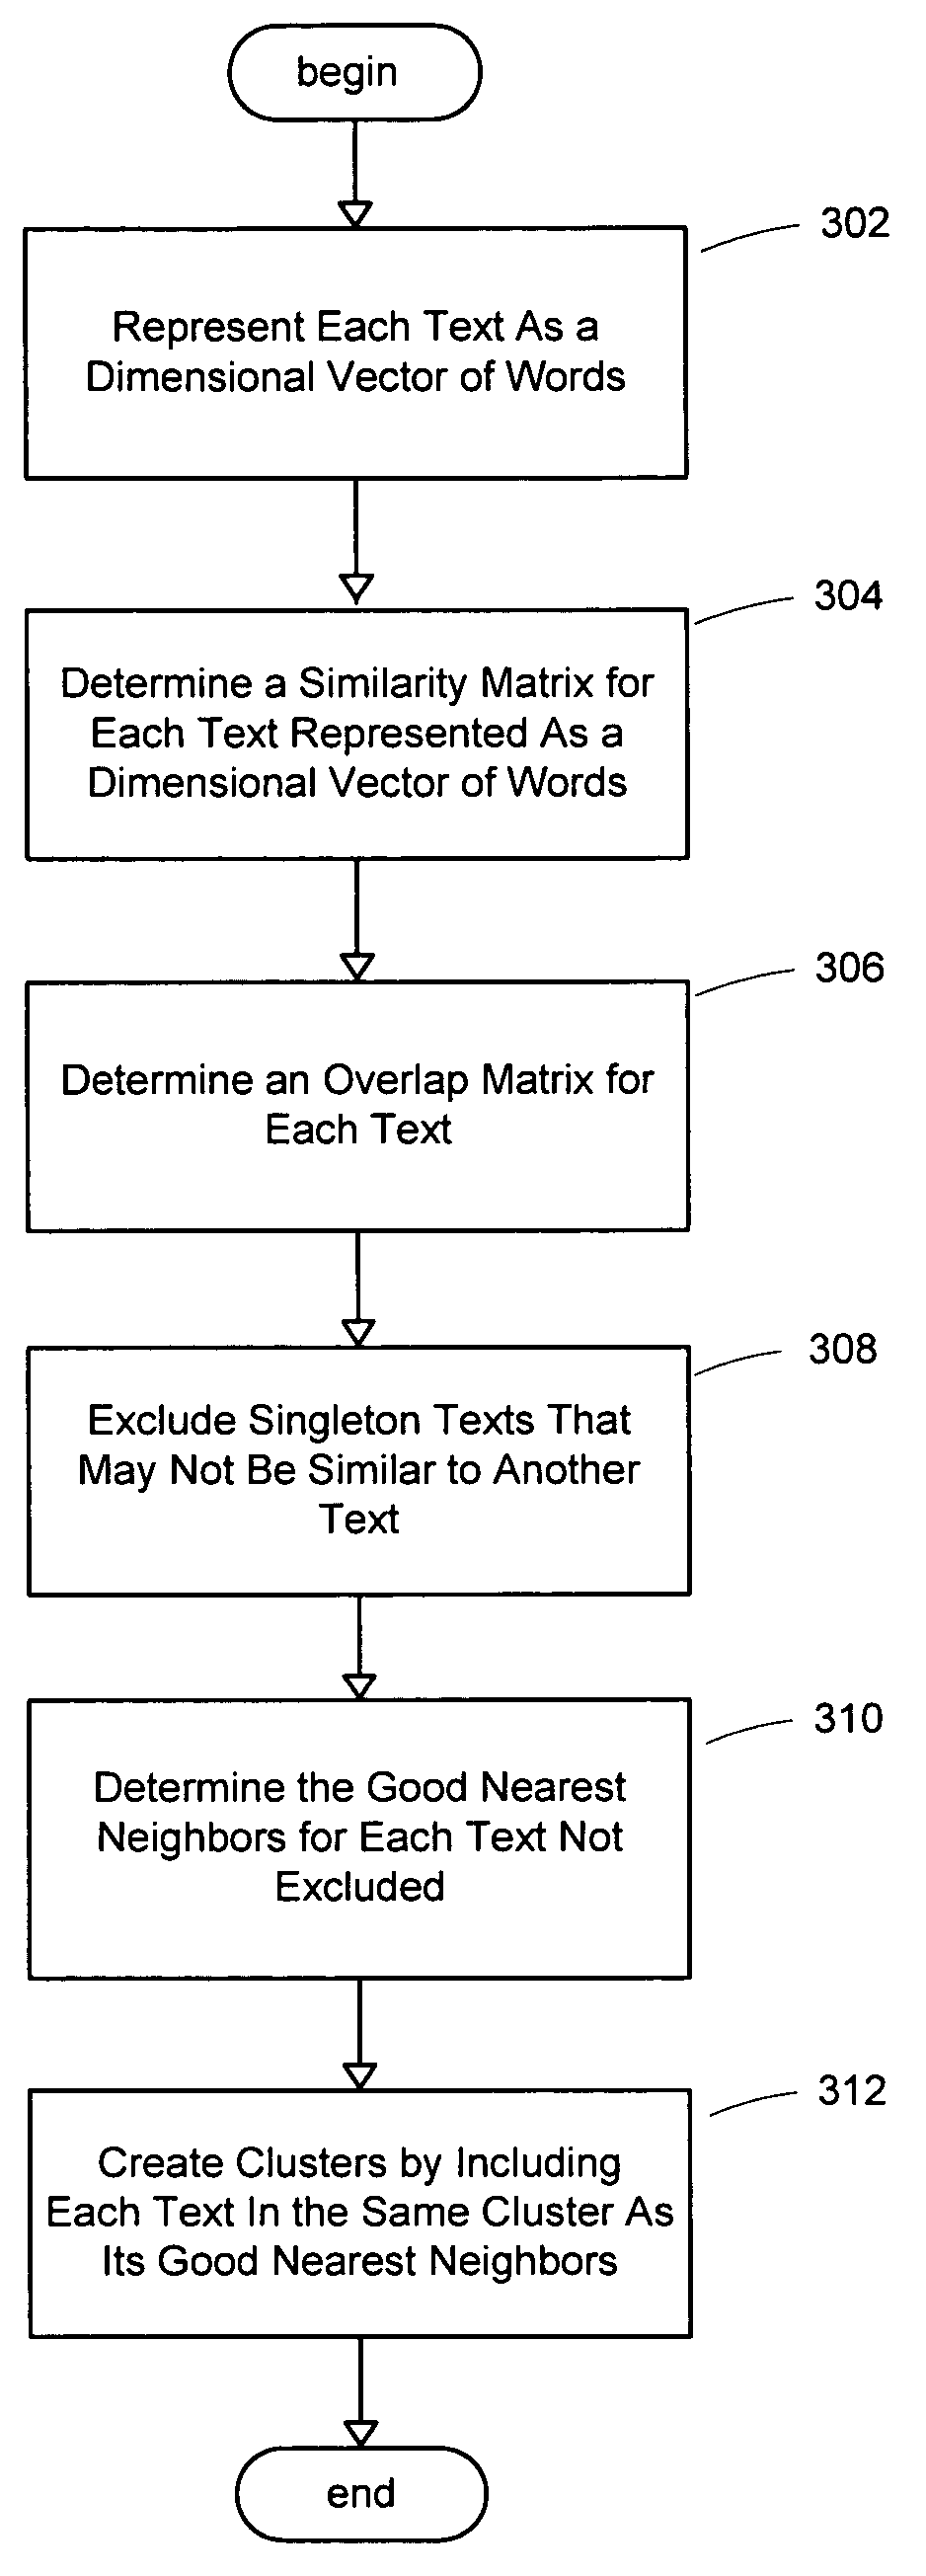 System and method for good nearest neighbor clustering of text